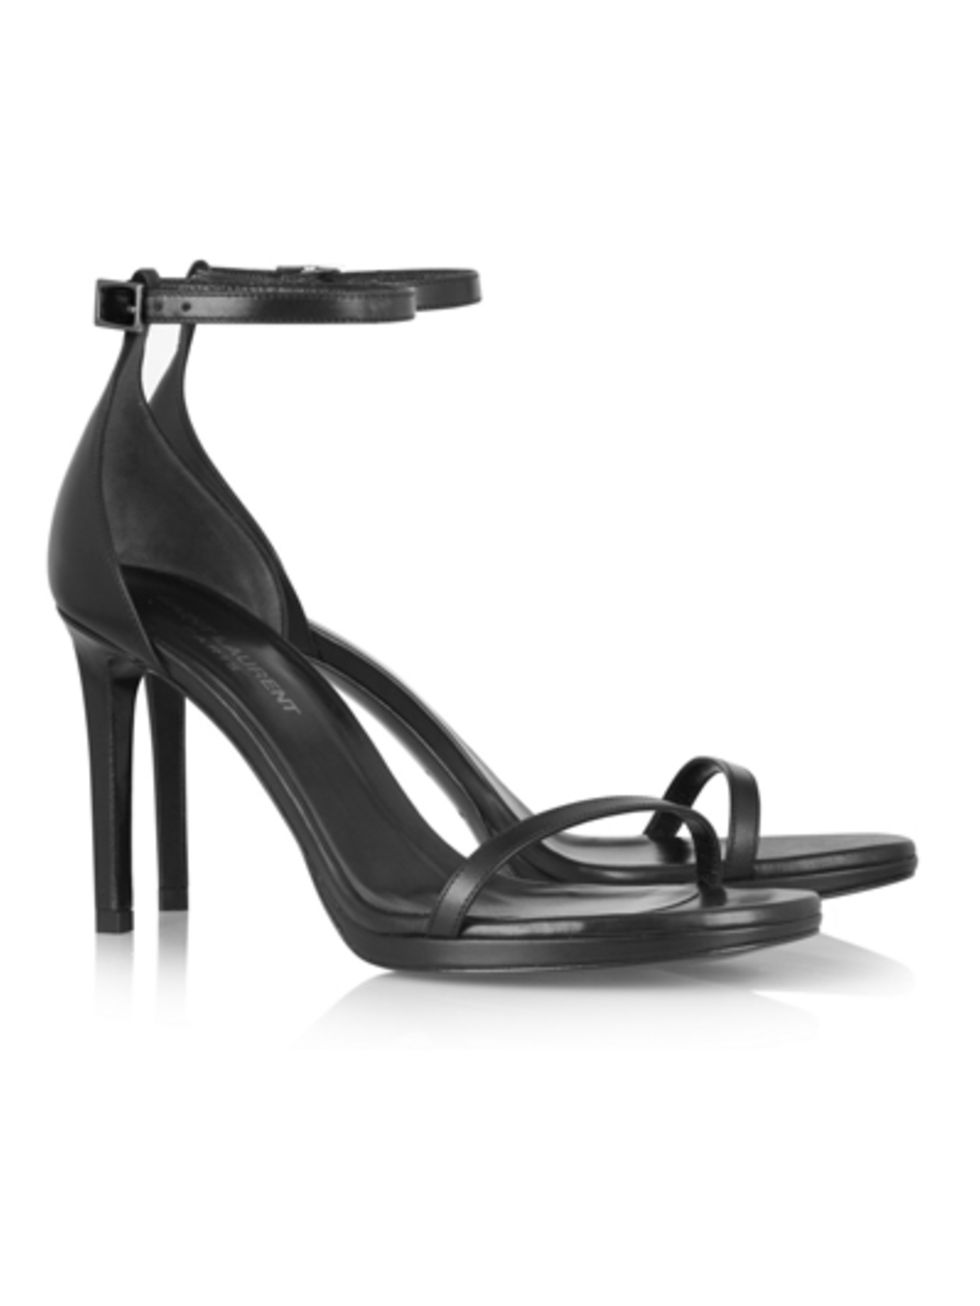 High heels, Basic pump, Sandal, Black, Material property, Still life photography, Silver, Fashion design, Court shoe, Leather, 